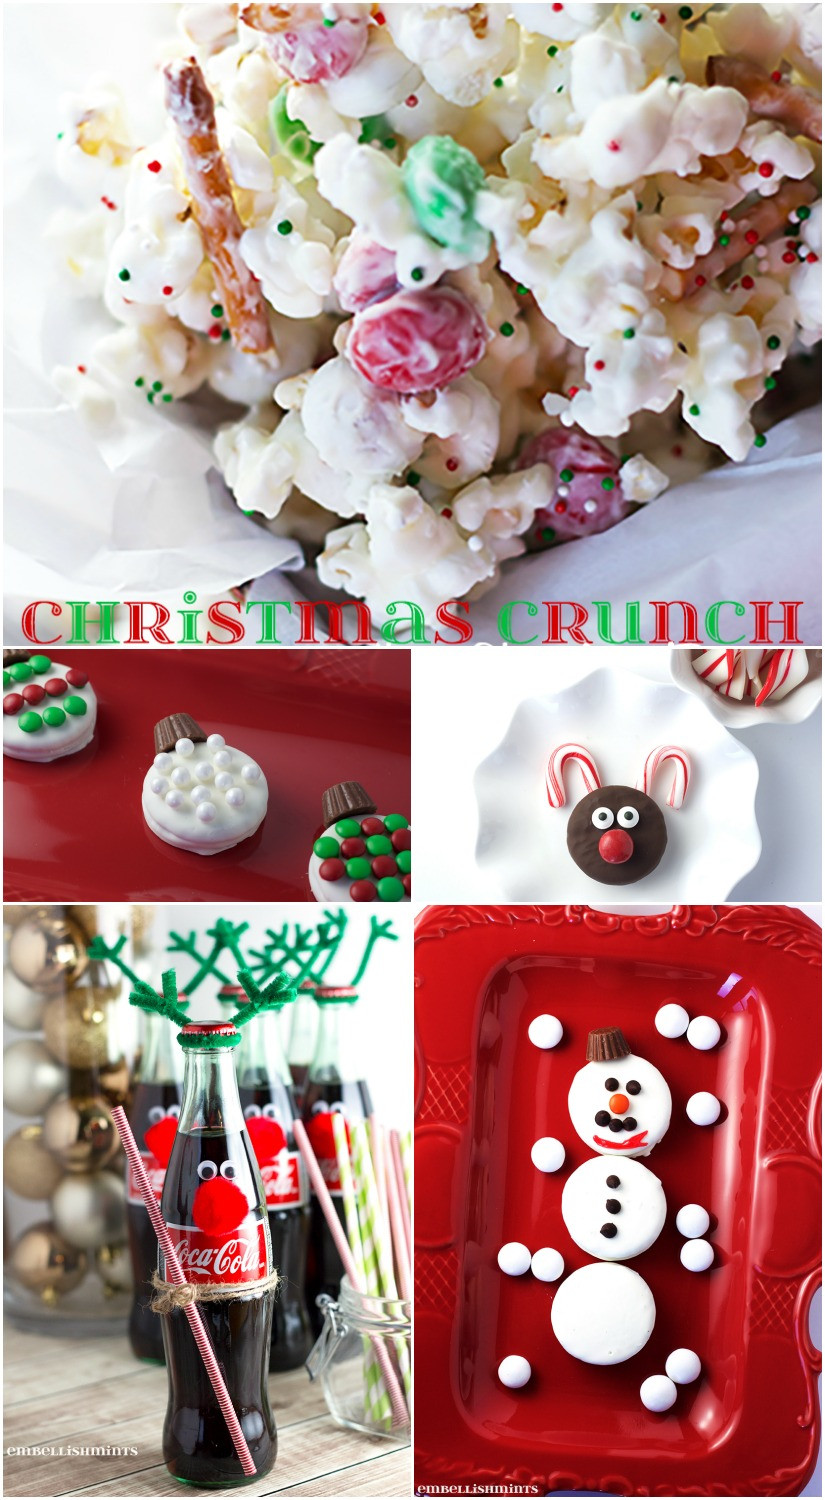 Christmas Party Treat Ideas
 Christmas Party Food Ideas For Kids Embellishmints